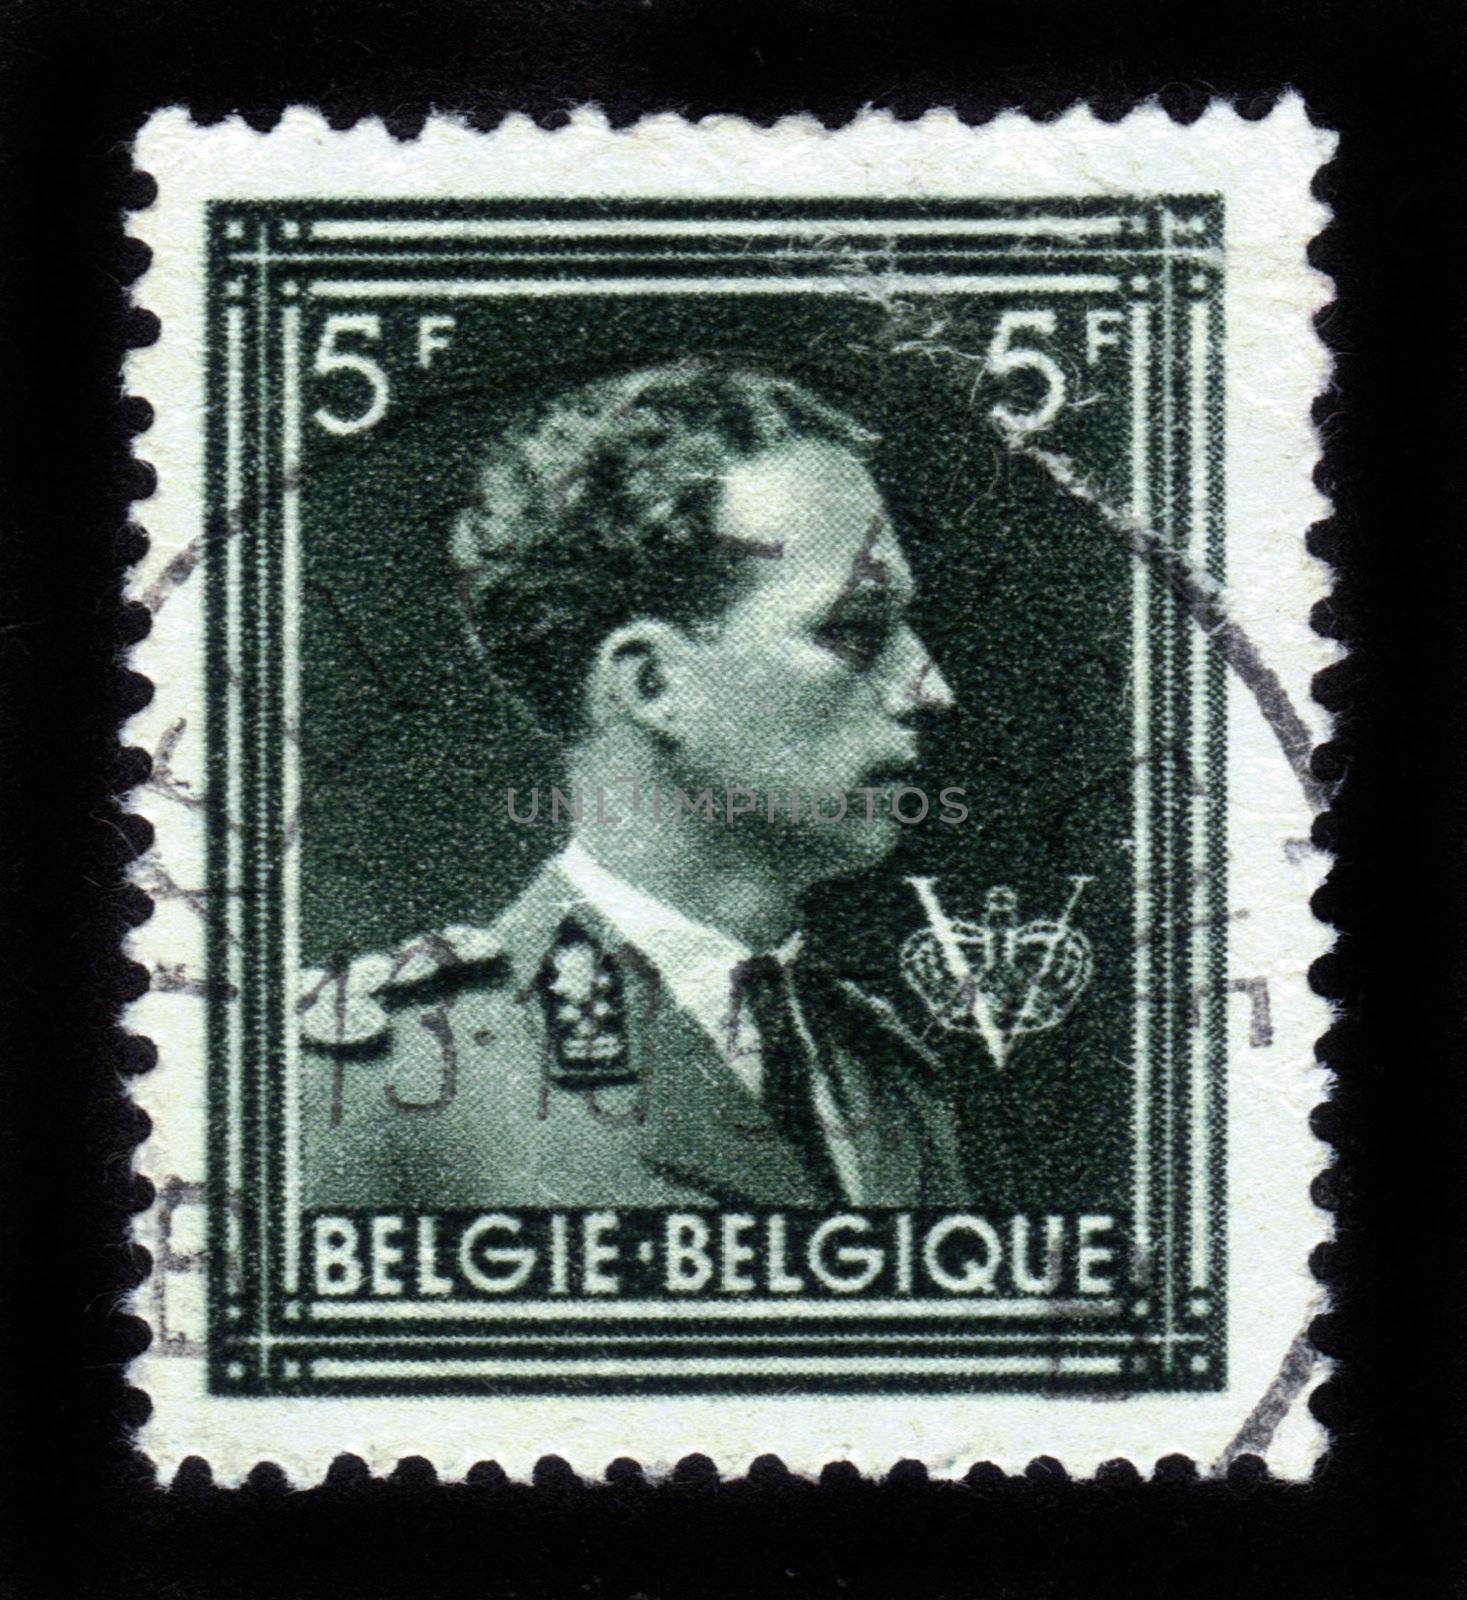 BELGIUM-CIRCA 1950:A stamp printed in BELGIUM shows image of Leopold III reigned as King of the Belgians from 1934 until 1951,circa 1950.